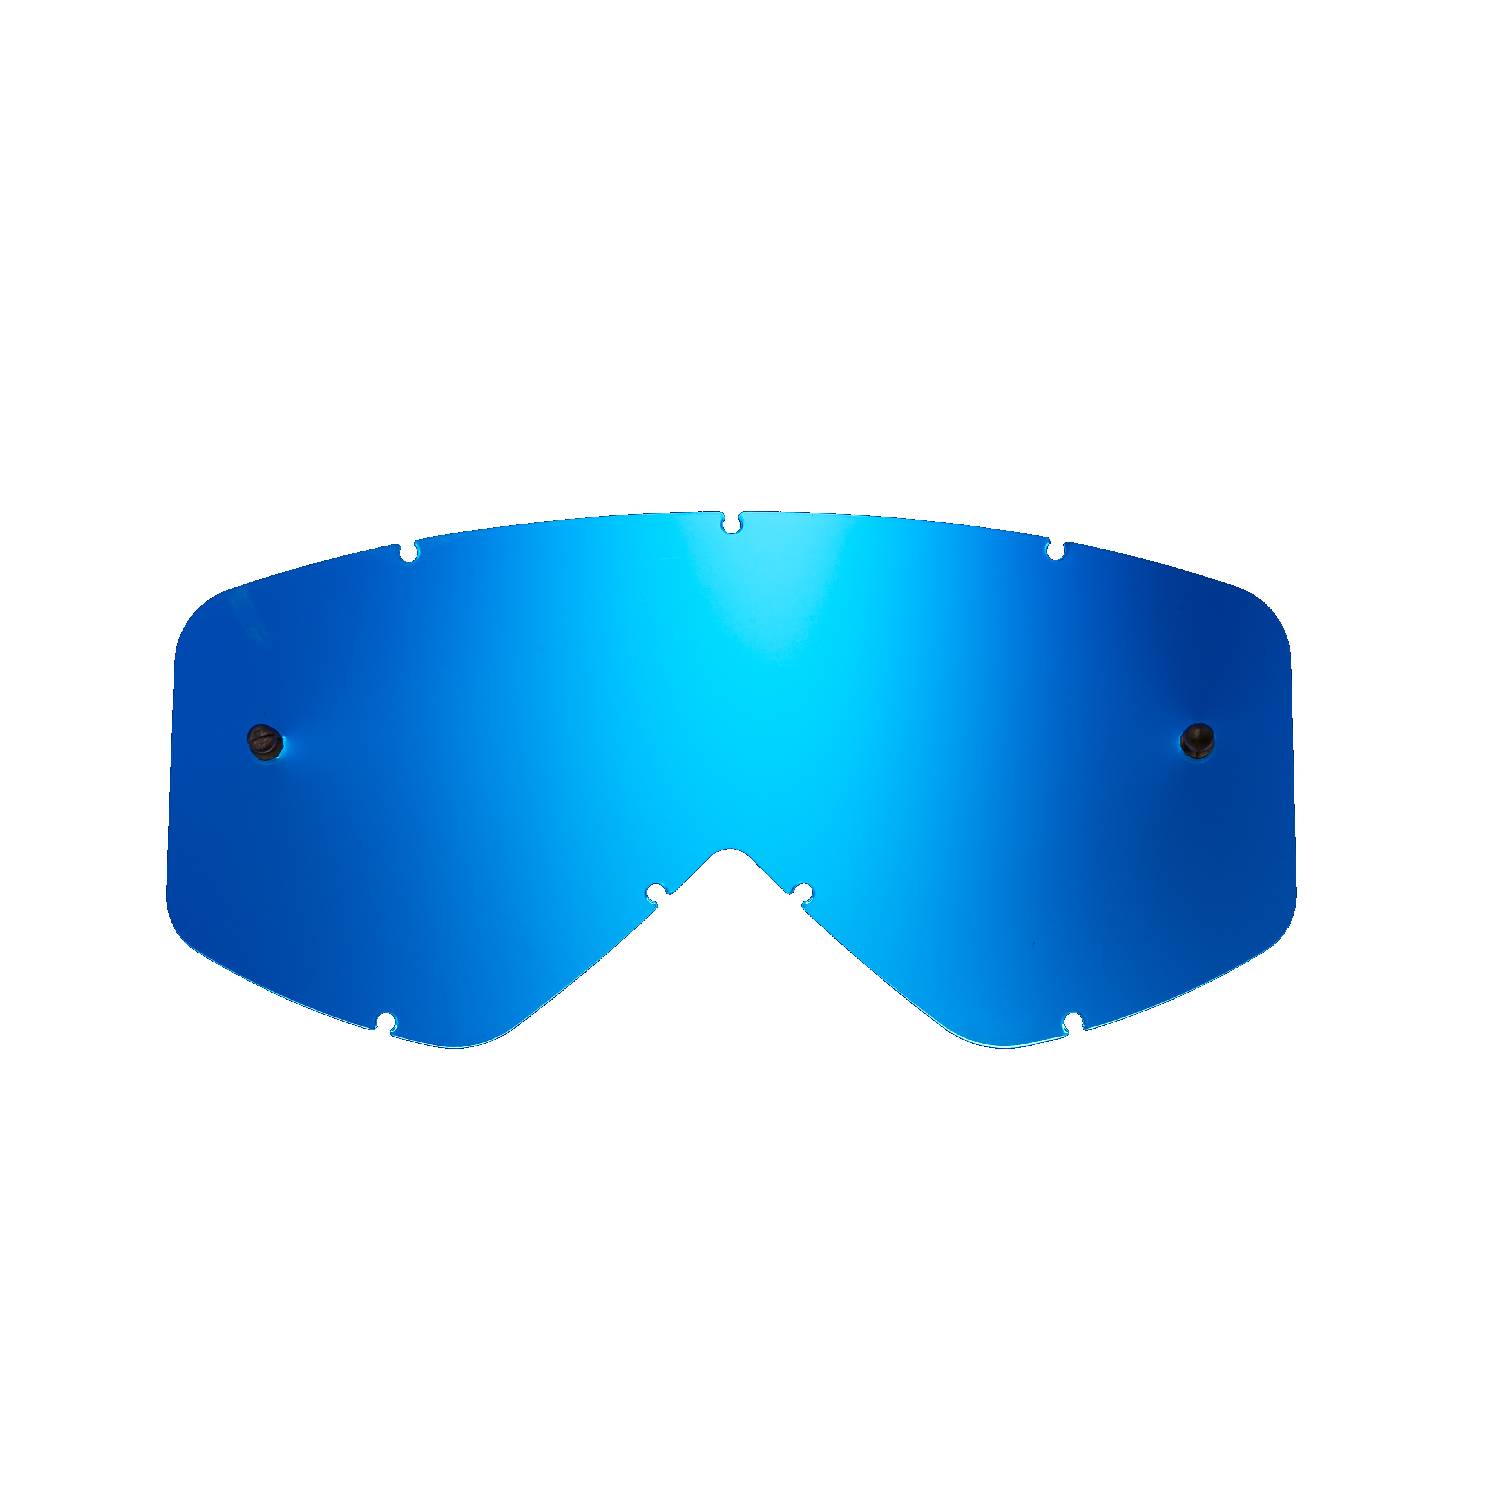 blue-toned mirrored replacement lenses for goggles compatible for Smith Fuel / Intake / V1 / V2 goggle